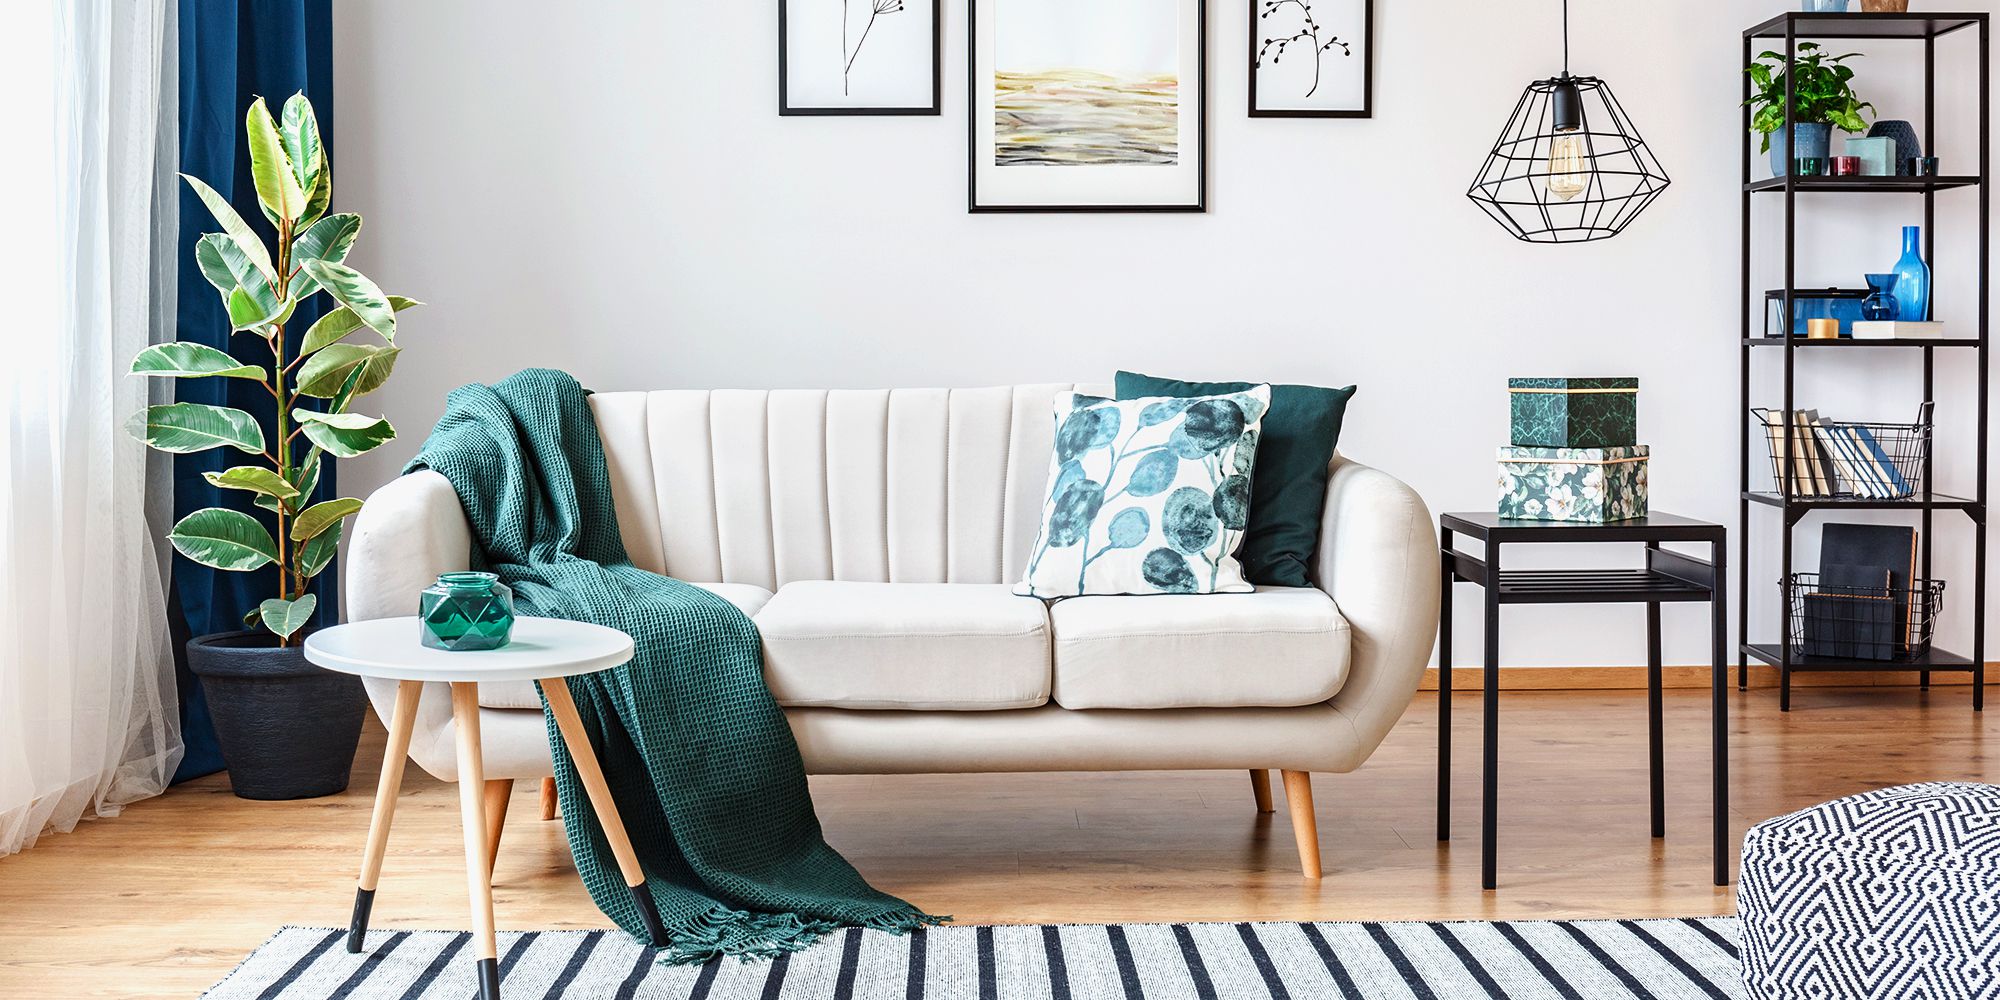 15 Best Small Apartment Decor Ideas for 2019 - How to Decorate a